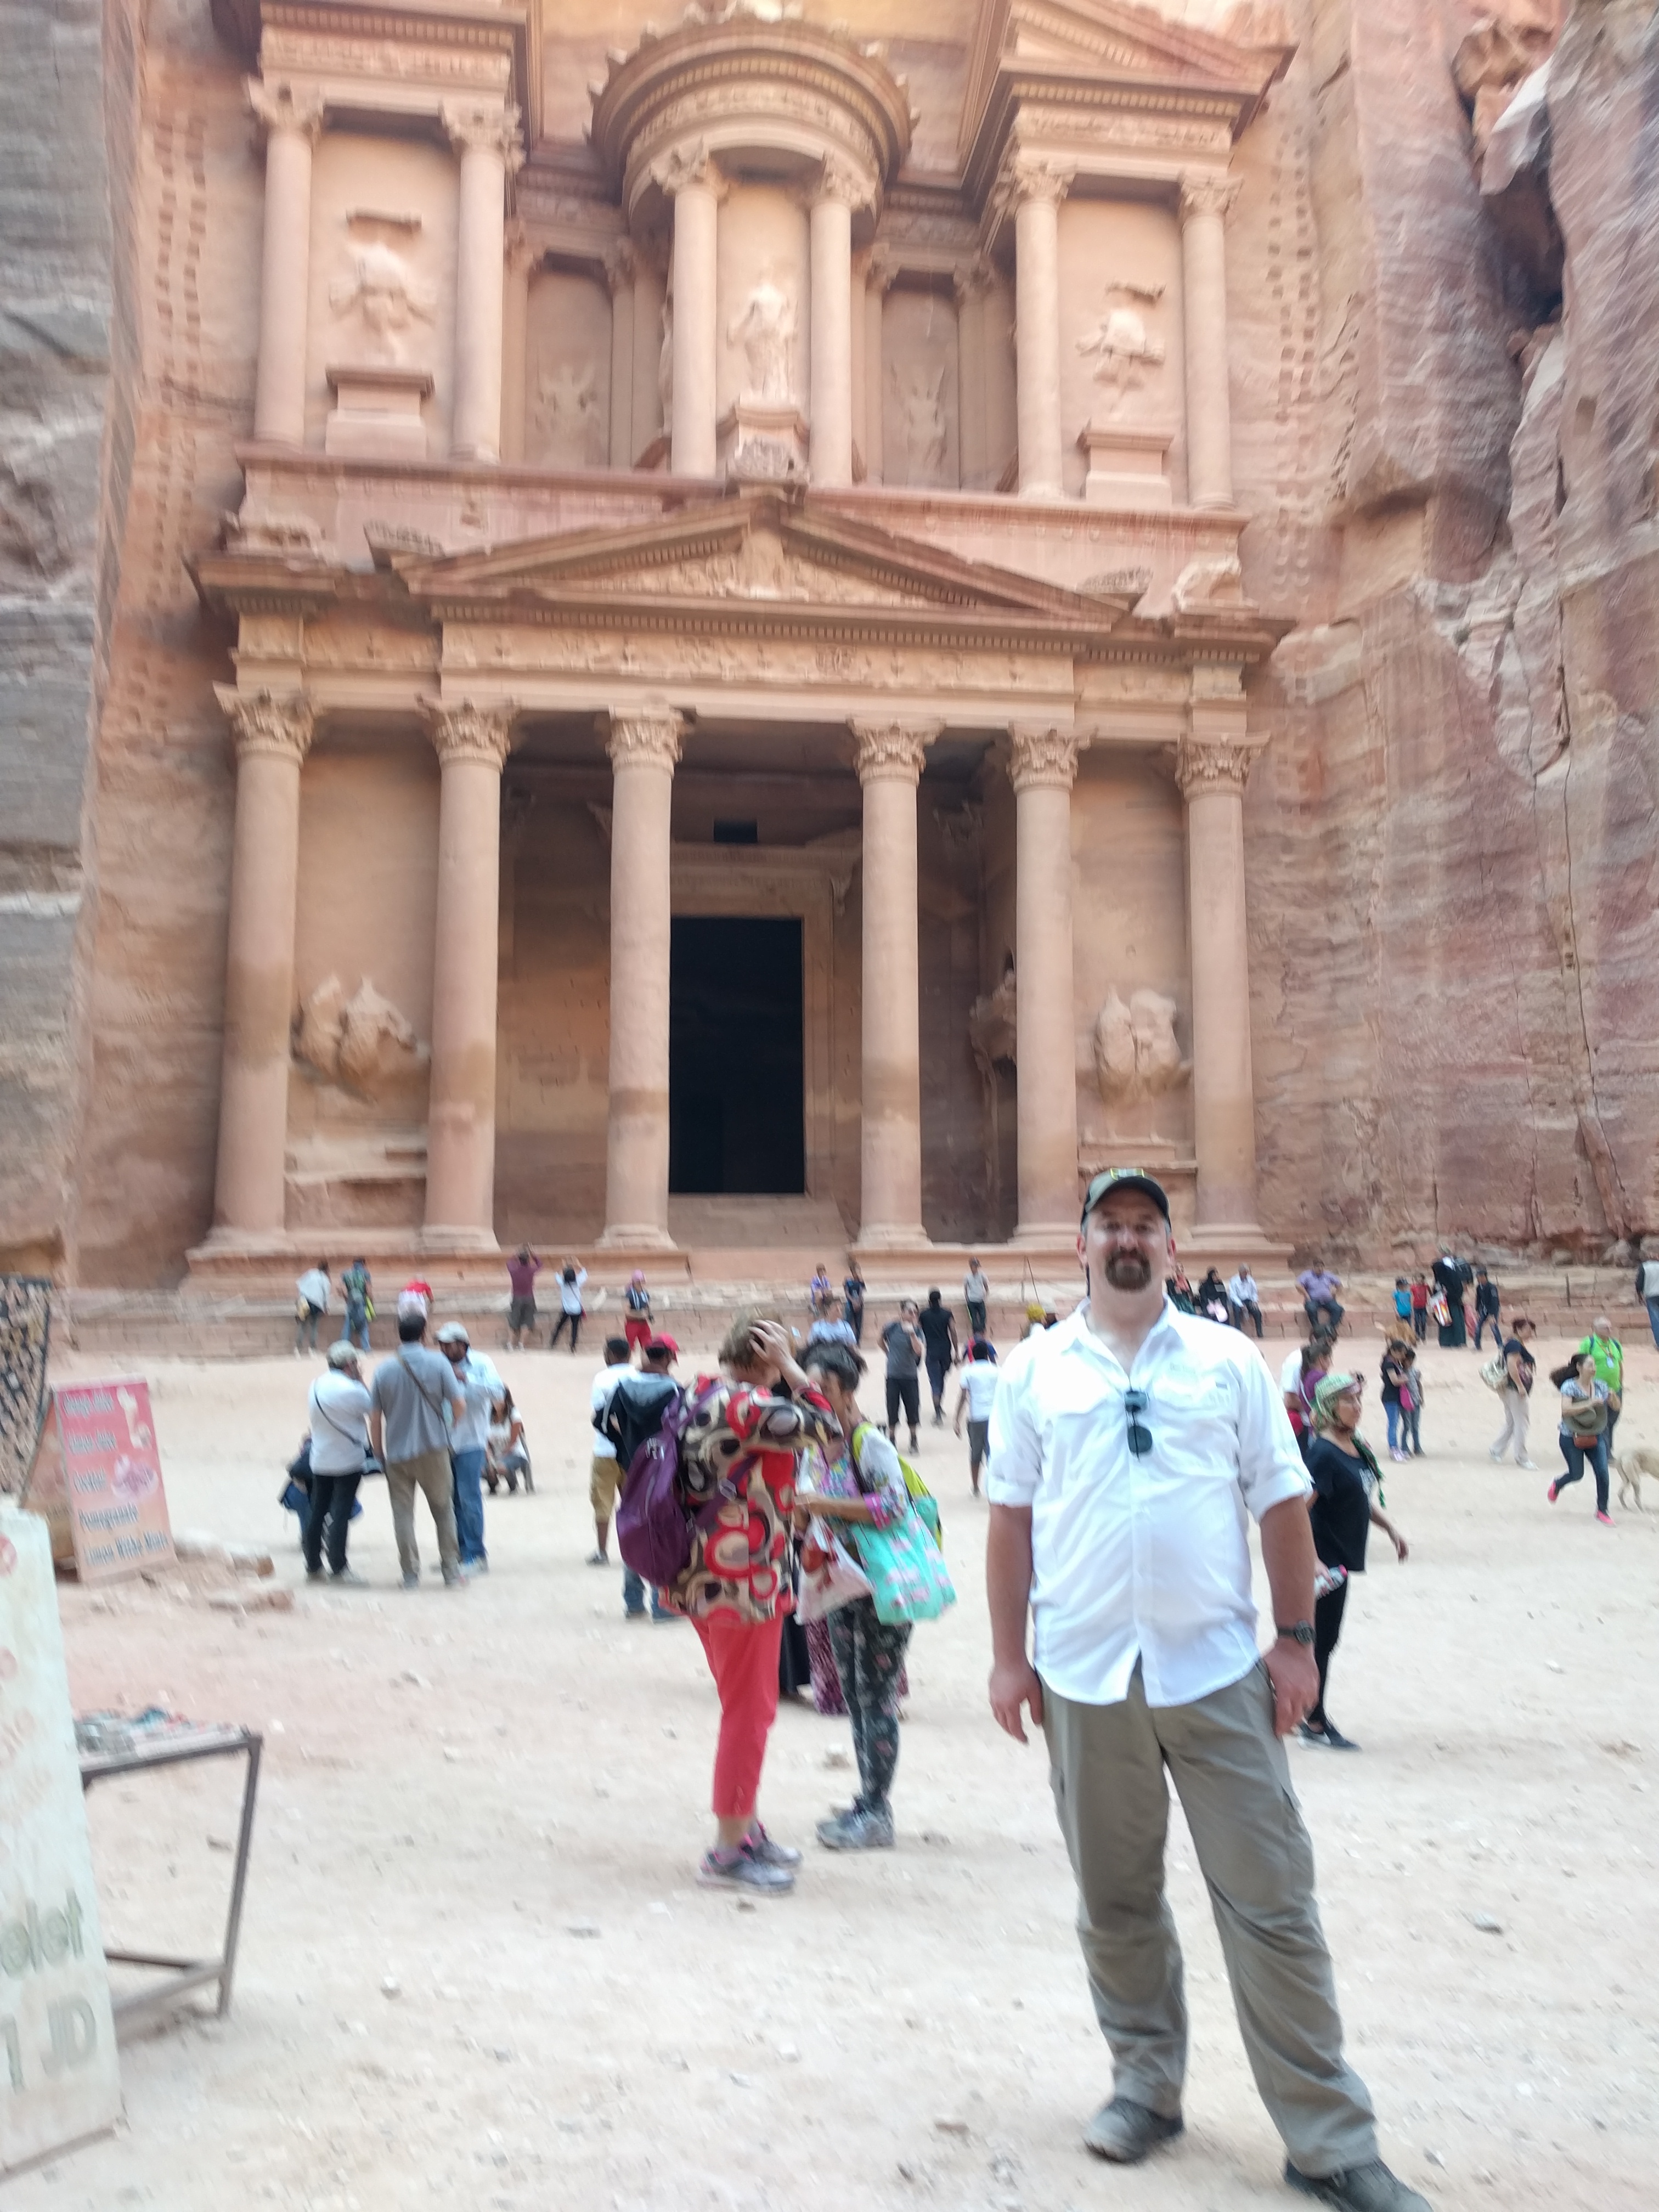 Me wearing the Eddie Bauer Travex pants in Jordan outside of the not so lost city of Petra.